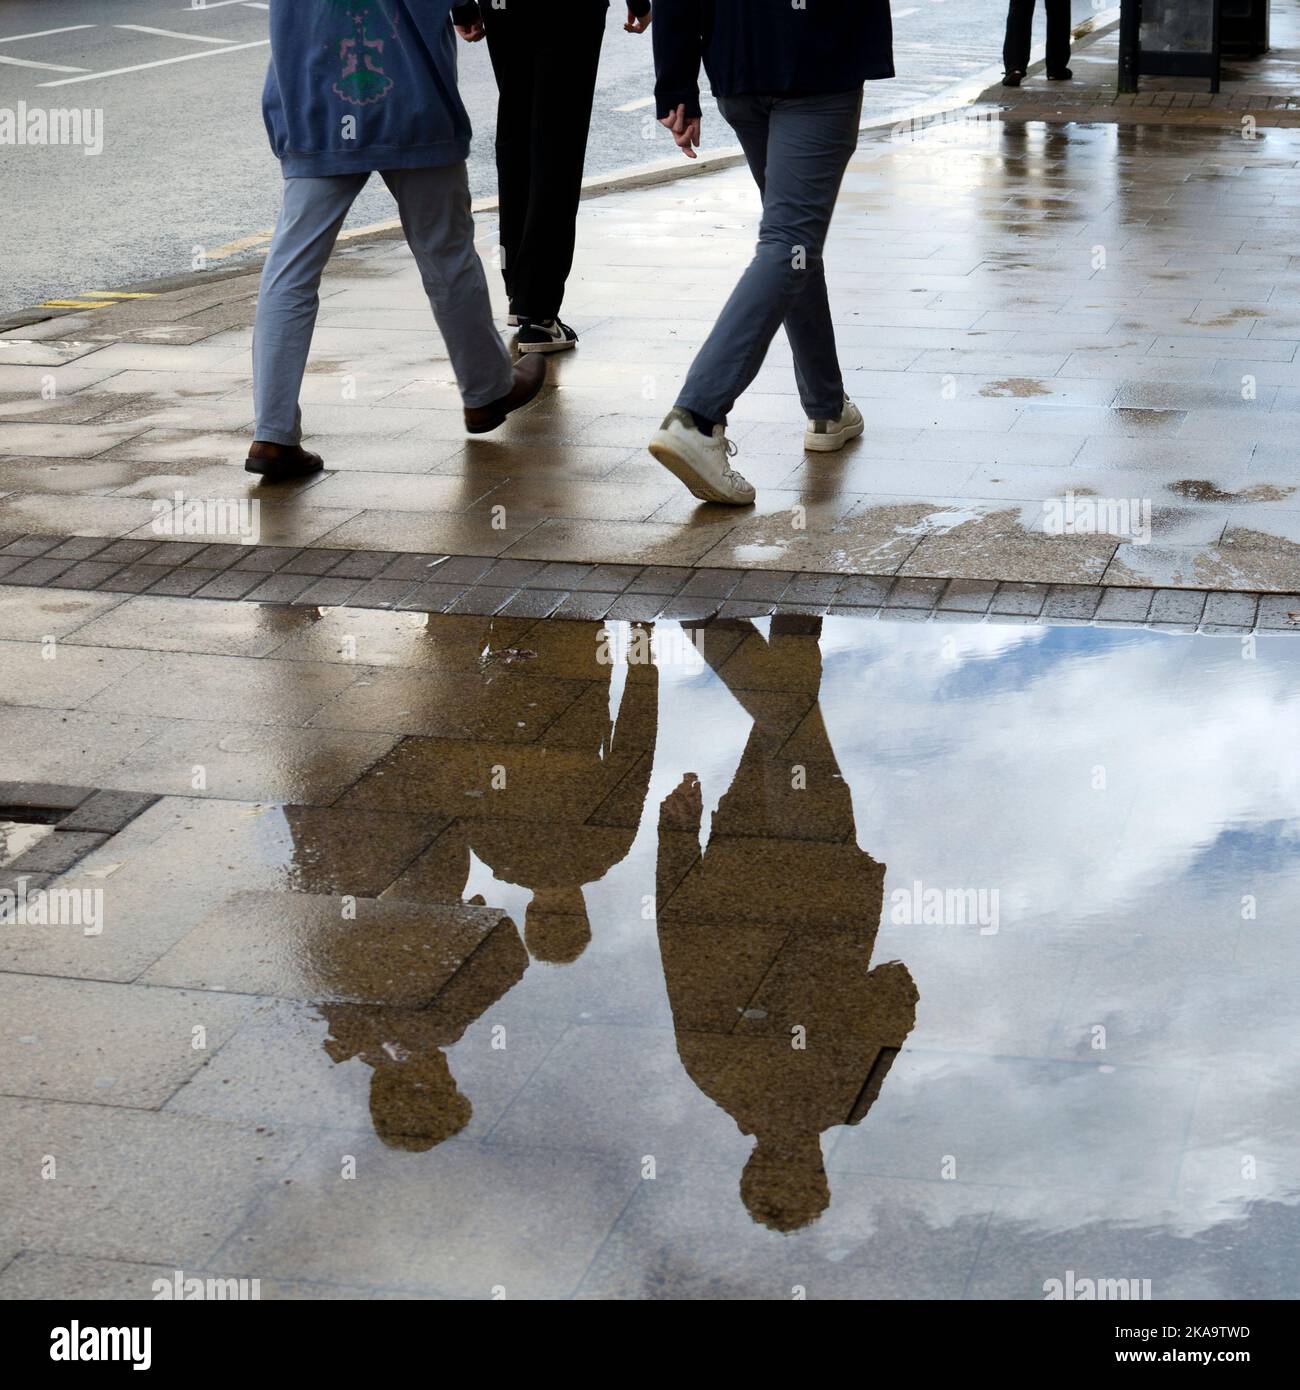 Three people walking, reflected in a puddle, Leamington Spa, UK Stock Photo